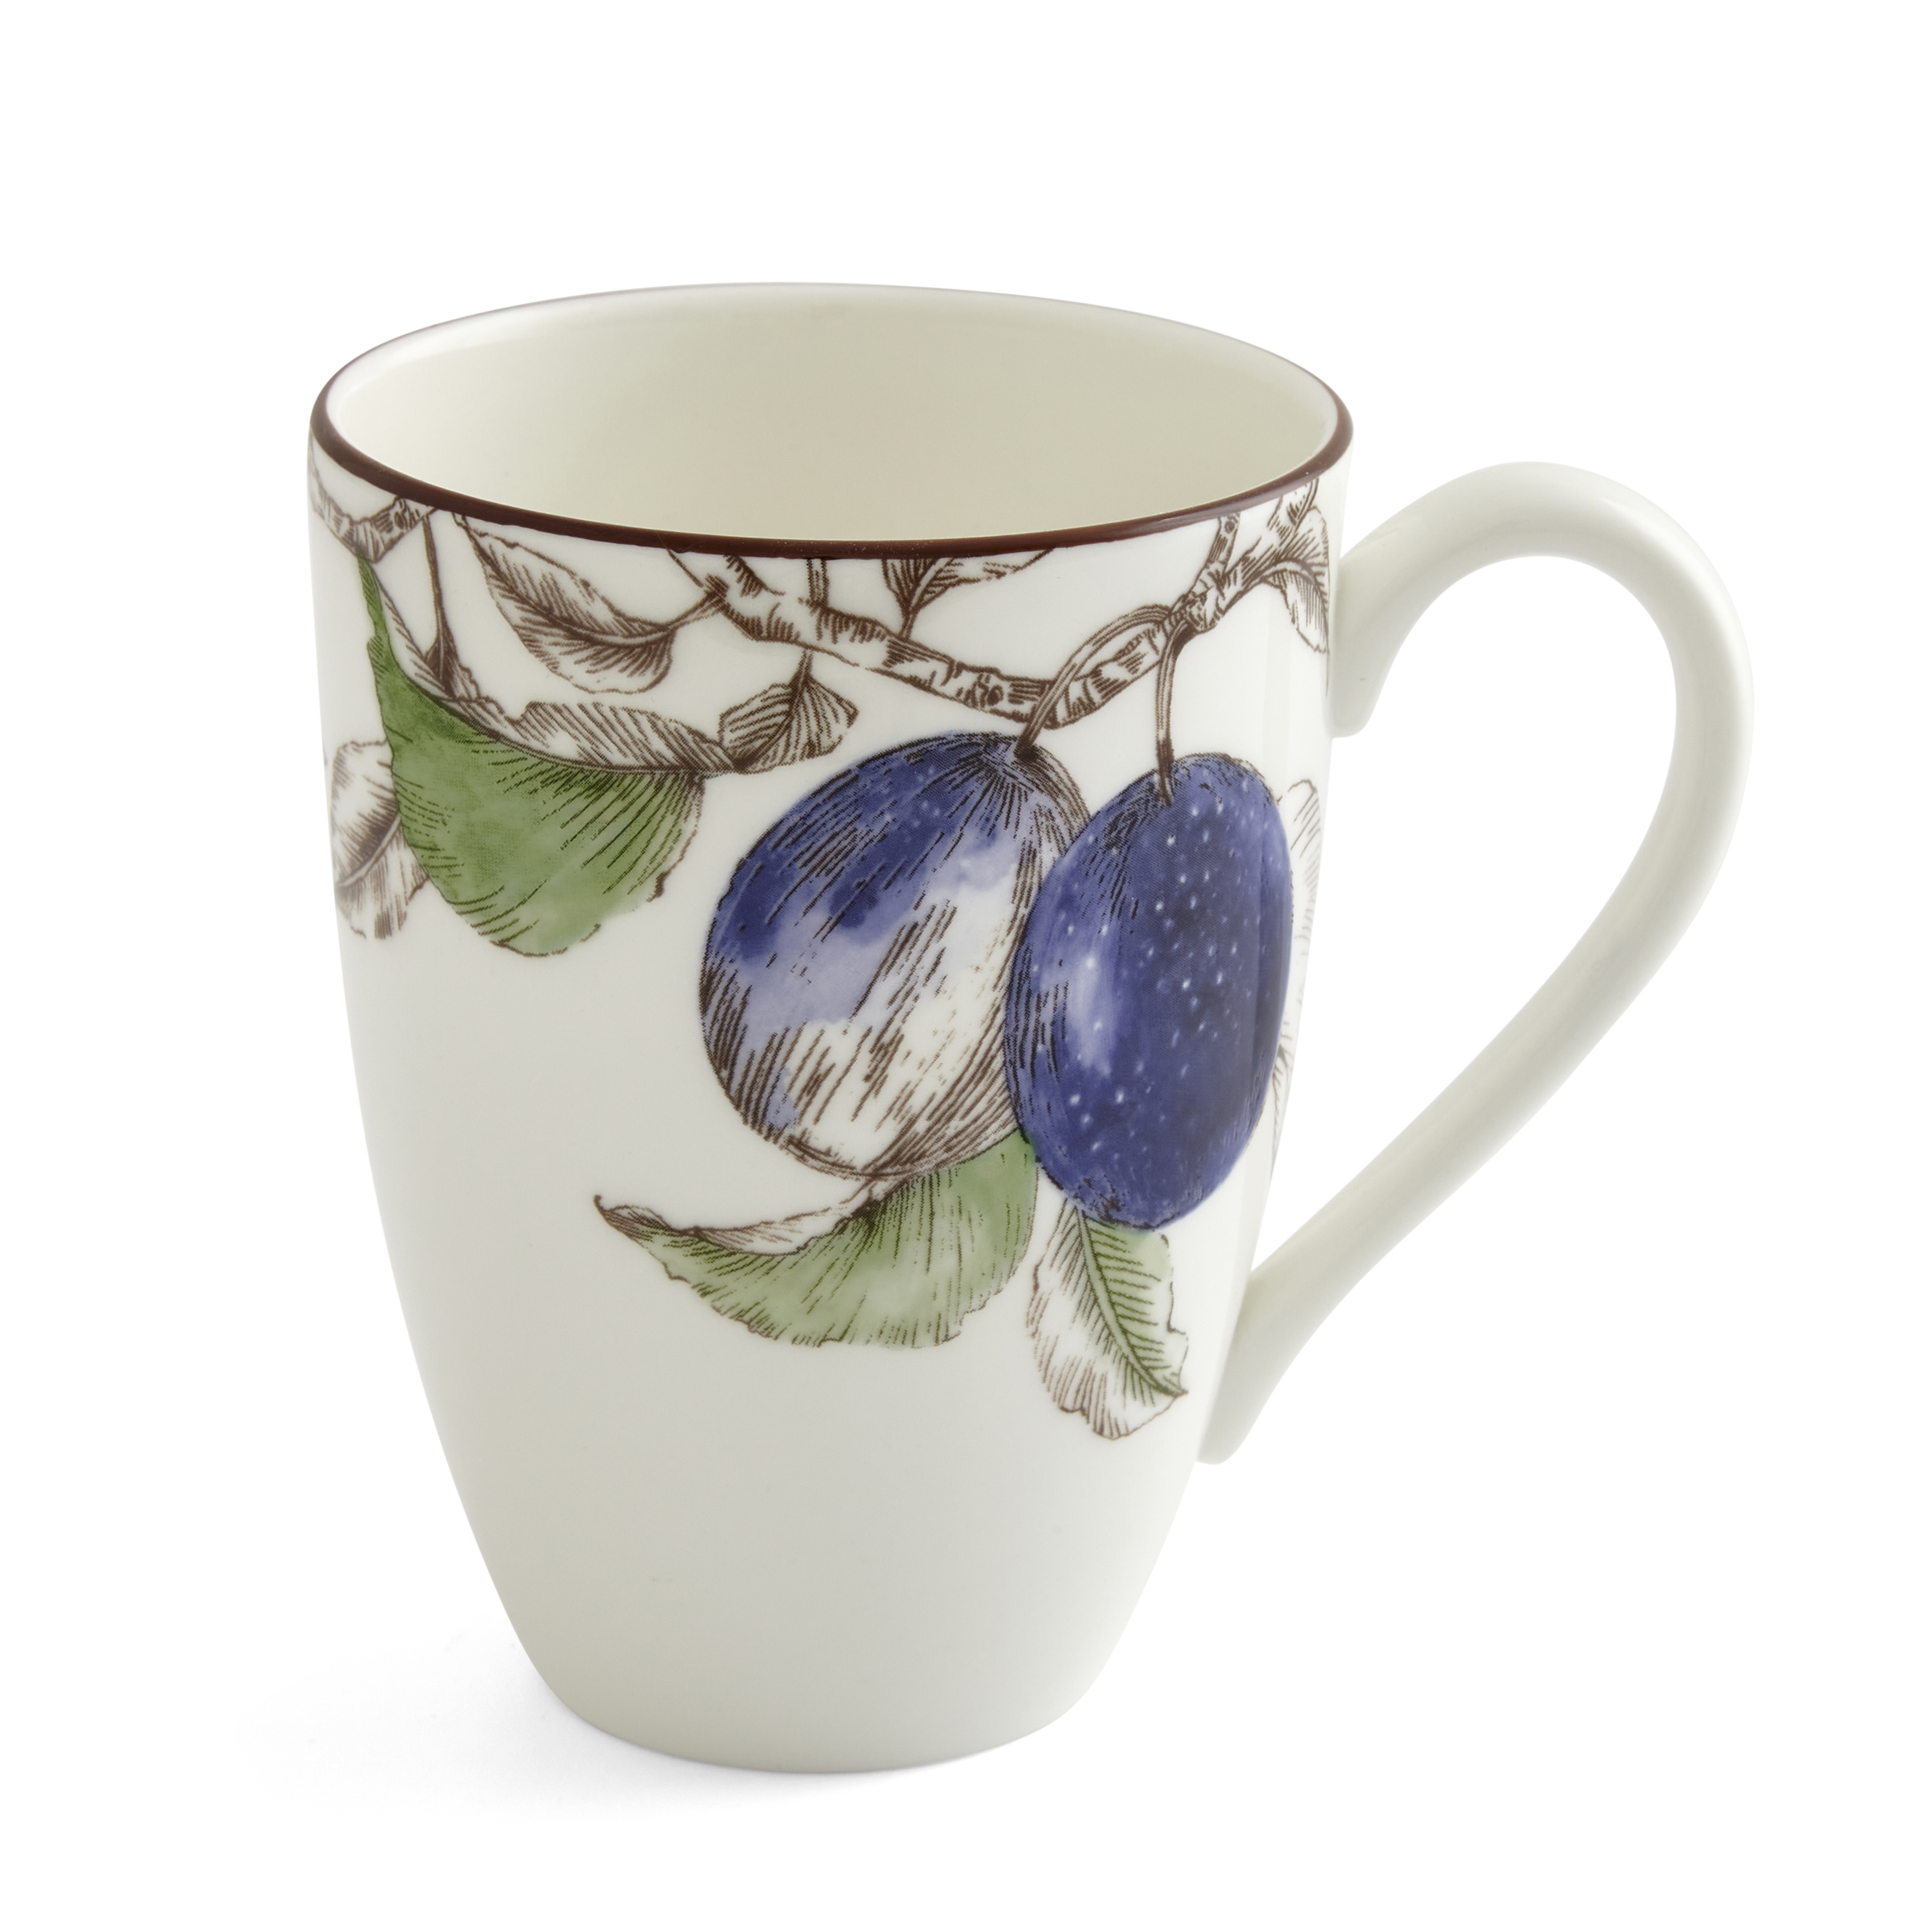 Nature's Bounty 17 Ounce Mug (Plum) image number null